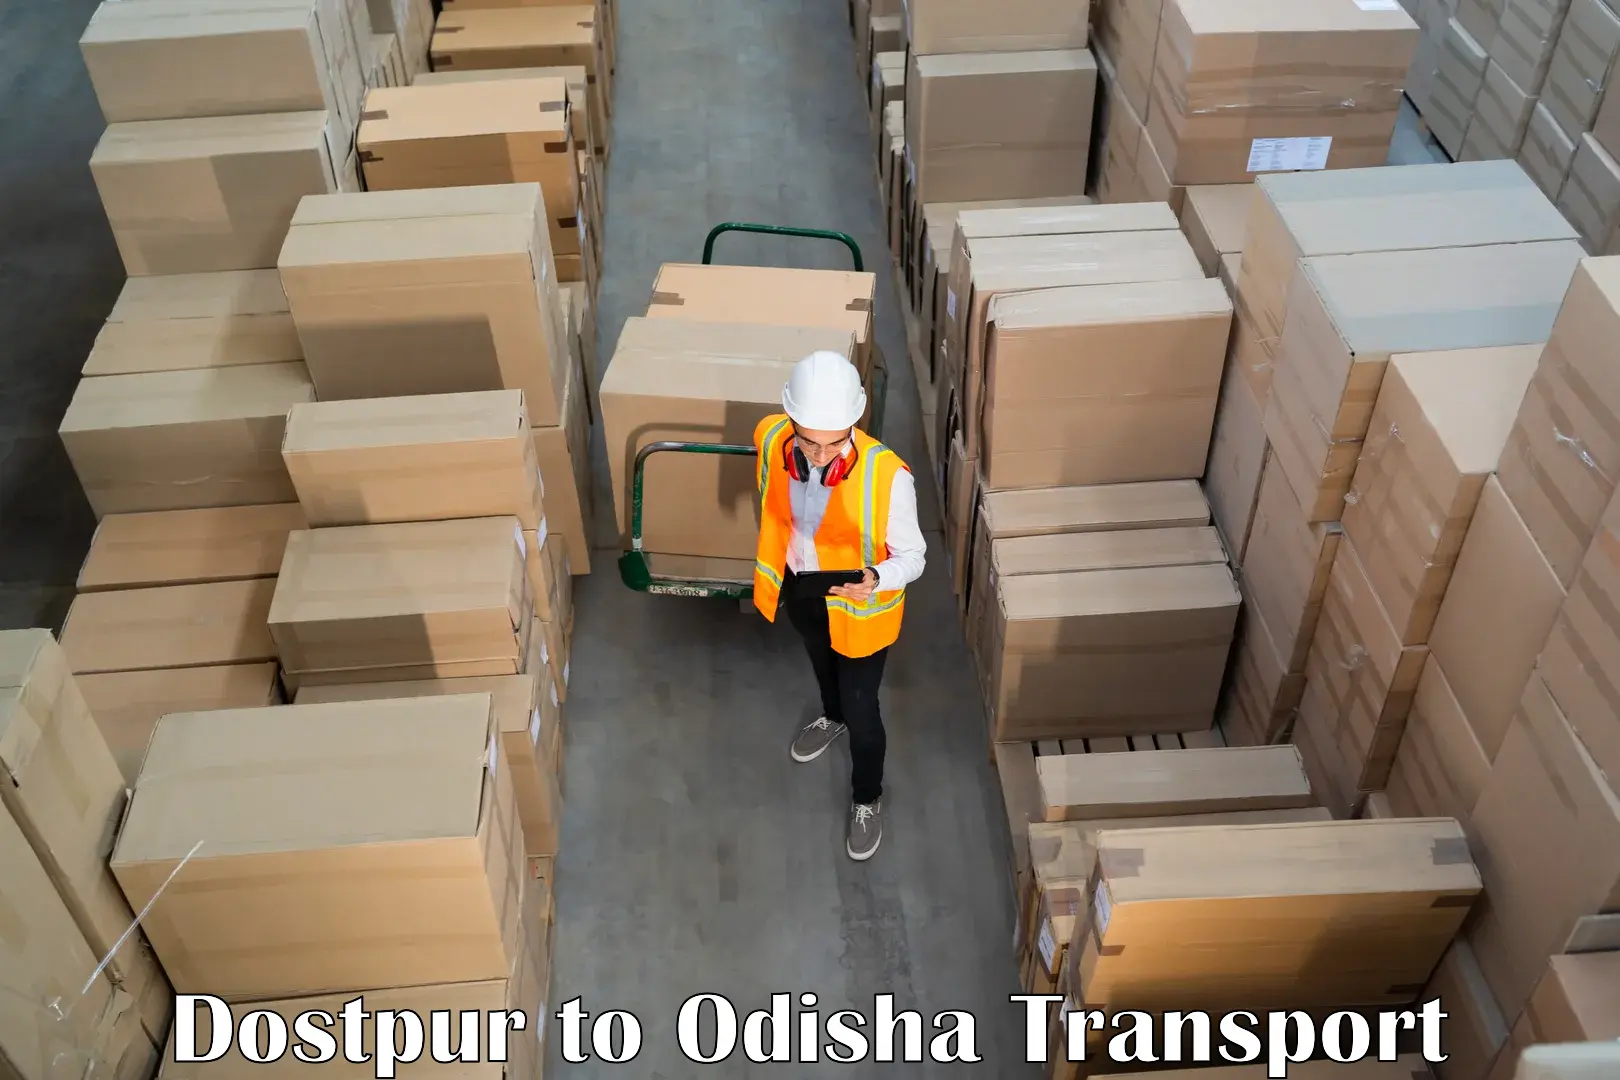 Goods delivery service Dostpur to Dhamara